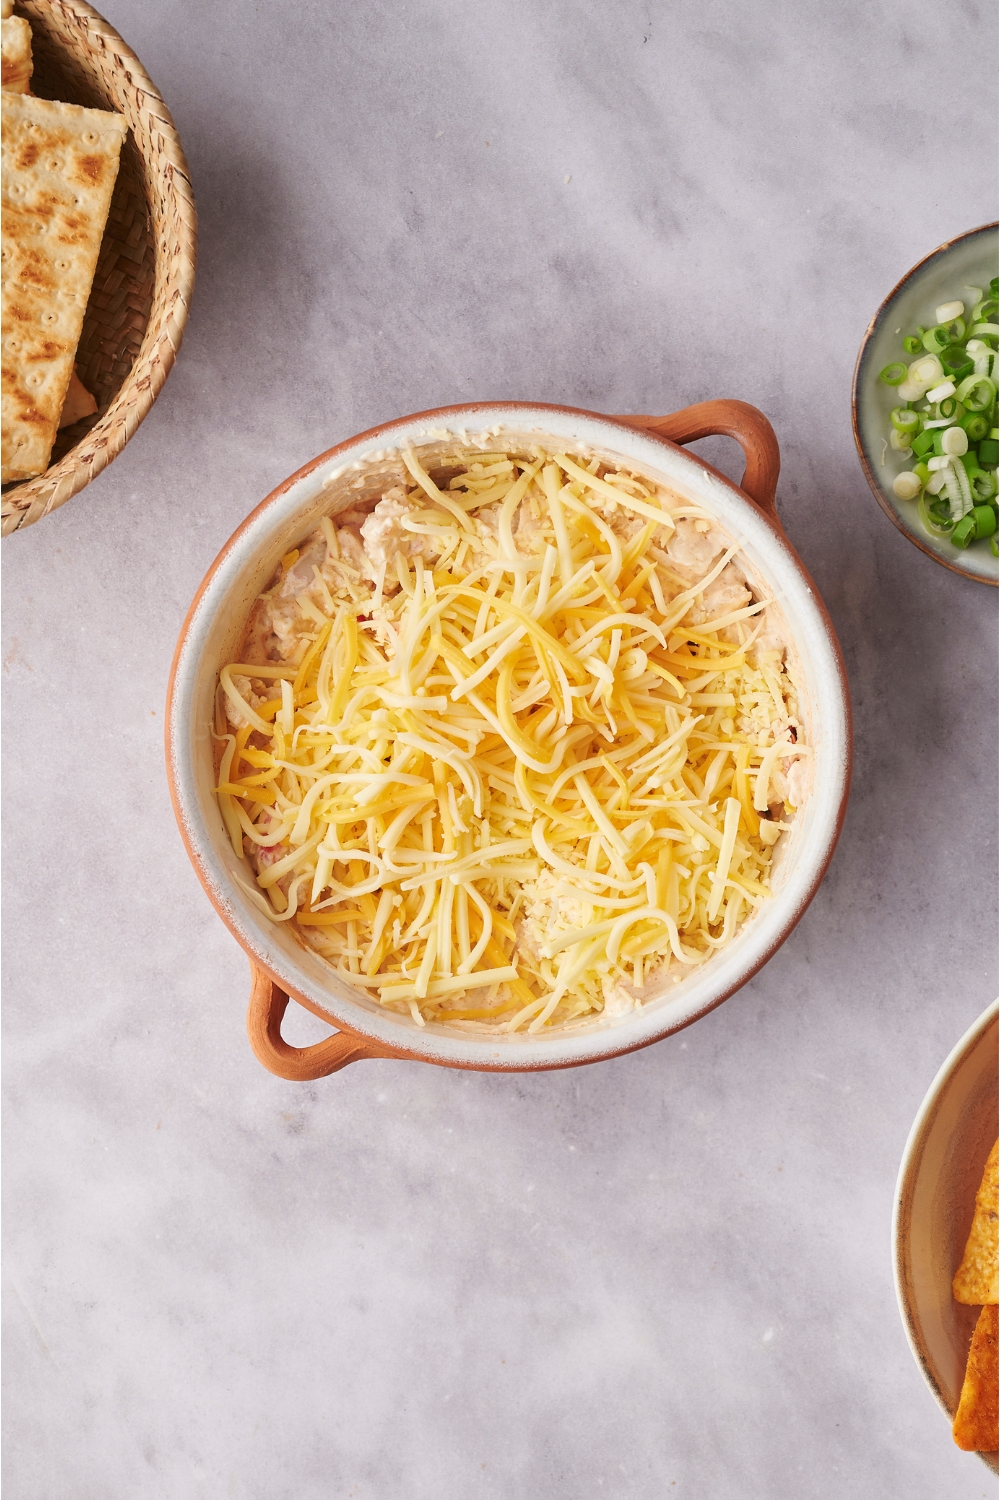 Overview of unbaked crab dip covered in shredded cheese in a white and brown baking dish.